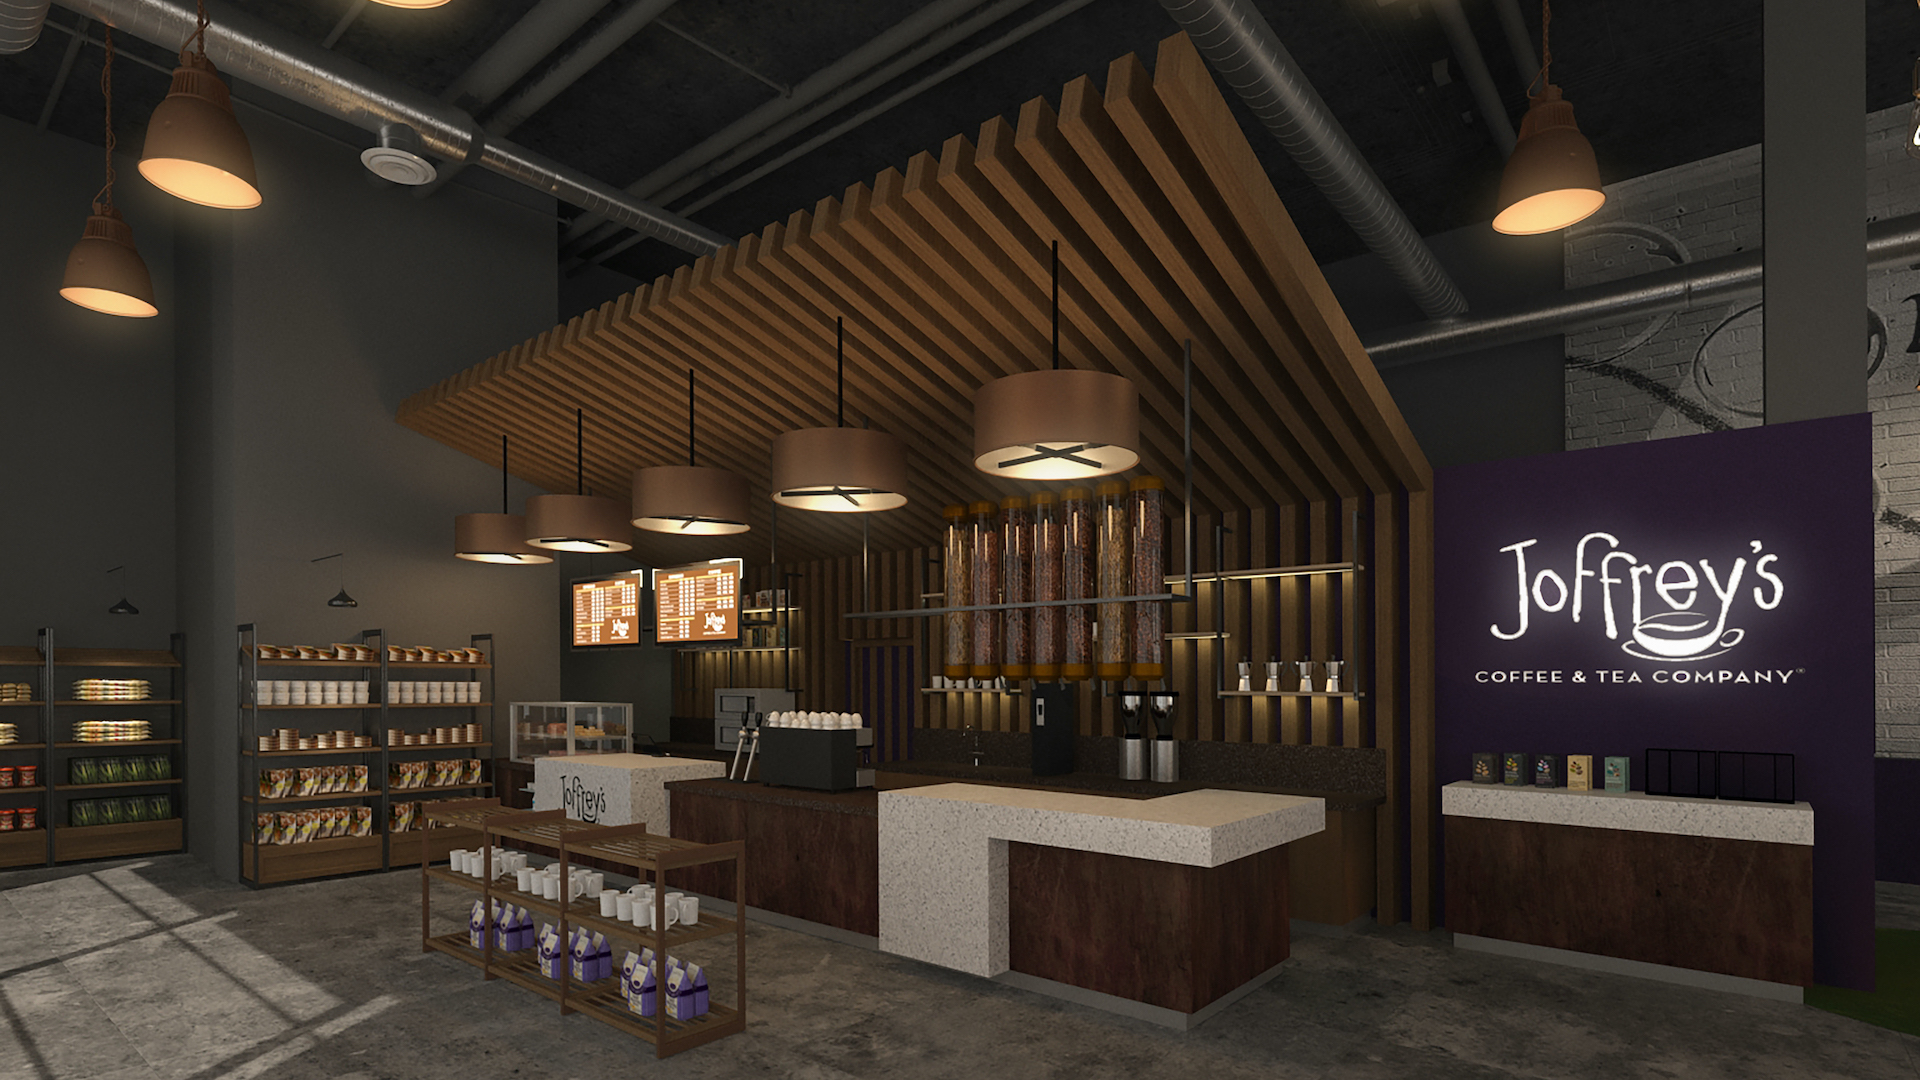 Rendering of a new coffee shop with an espresso bar